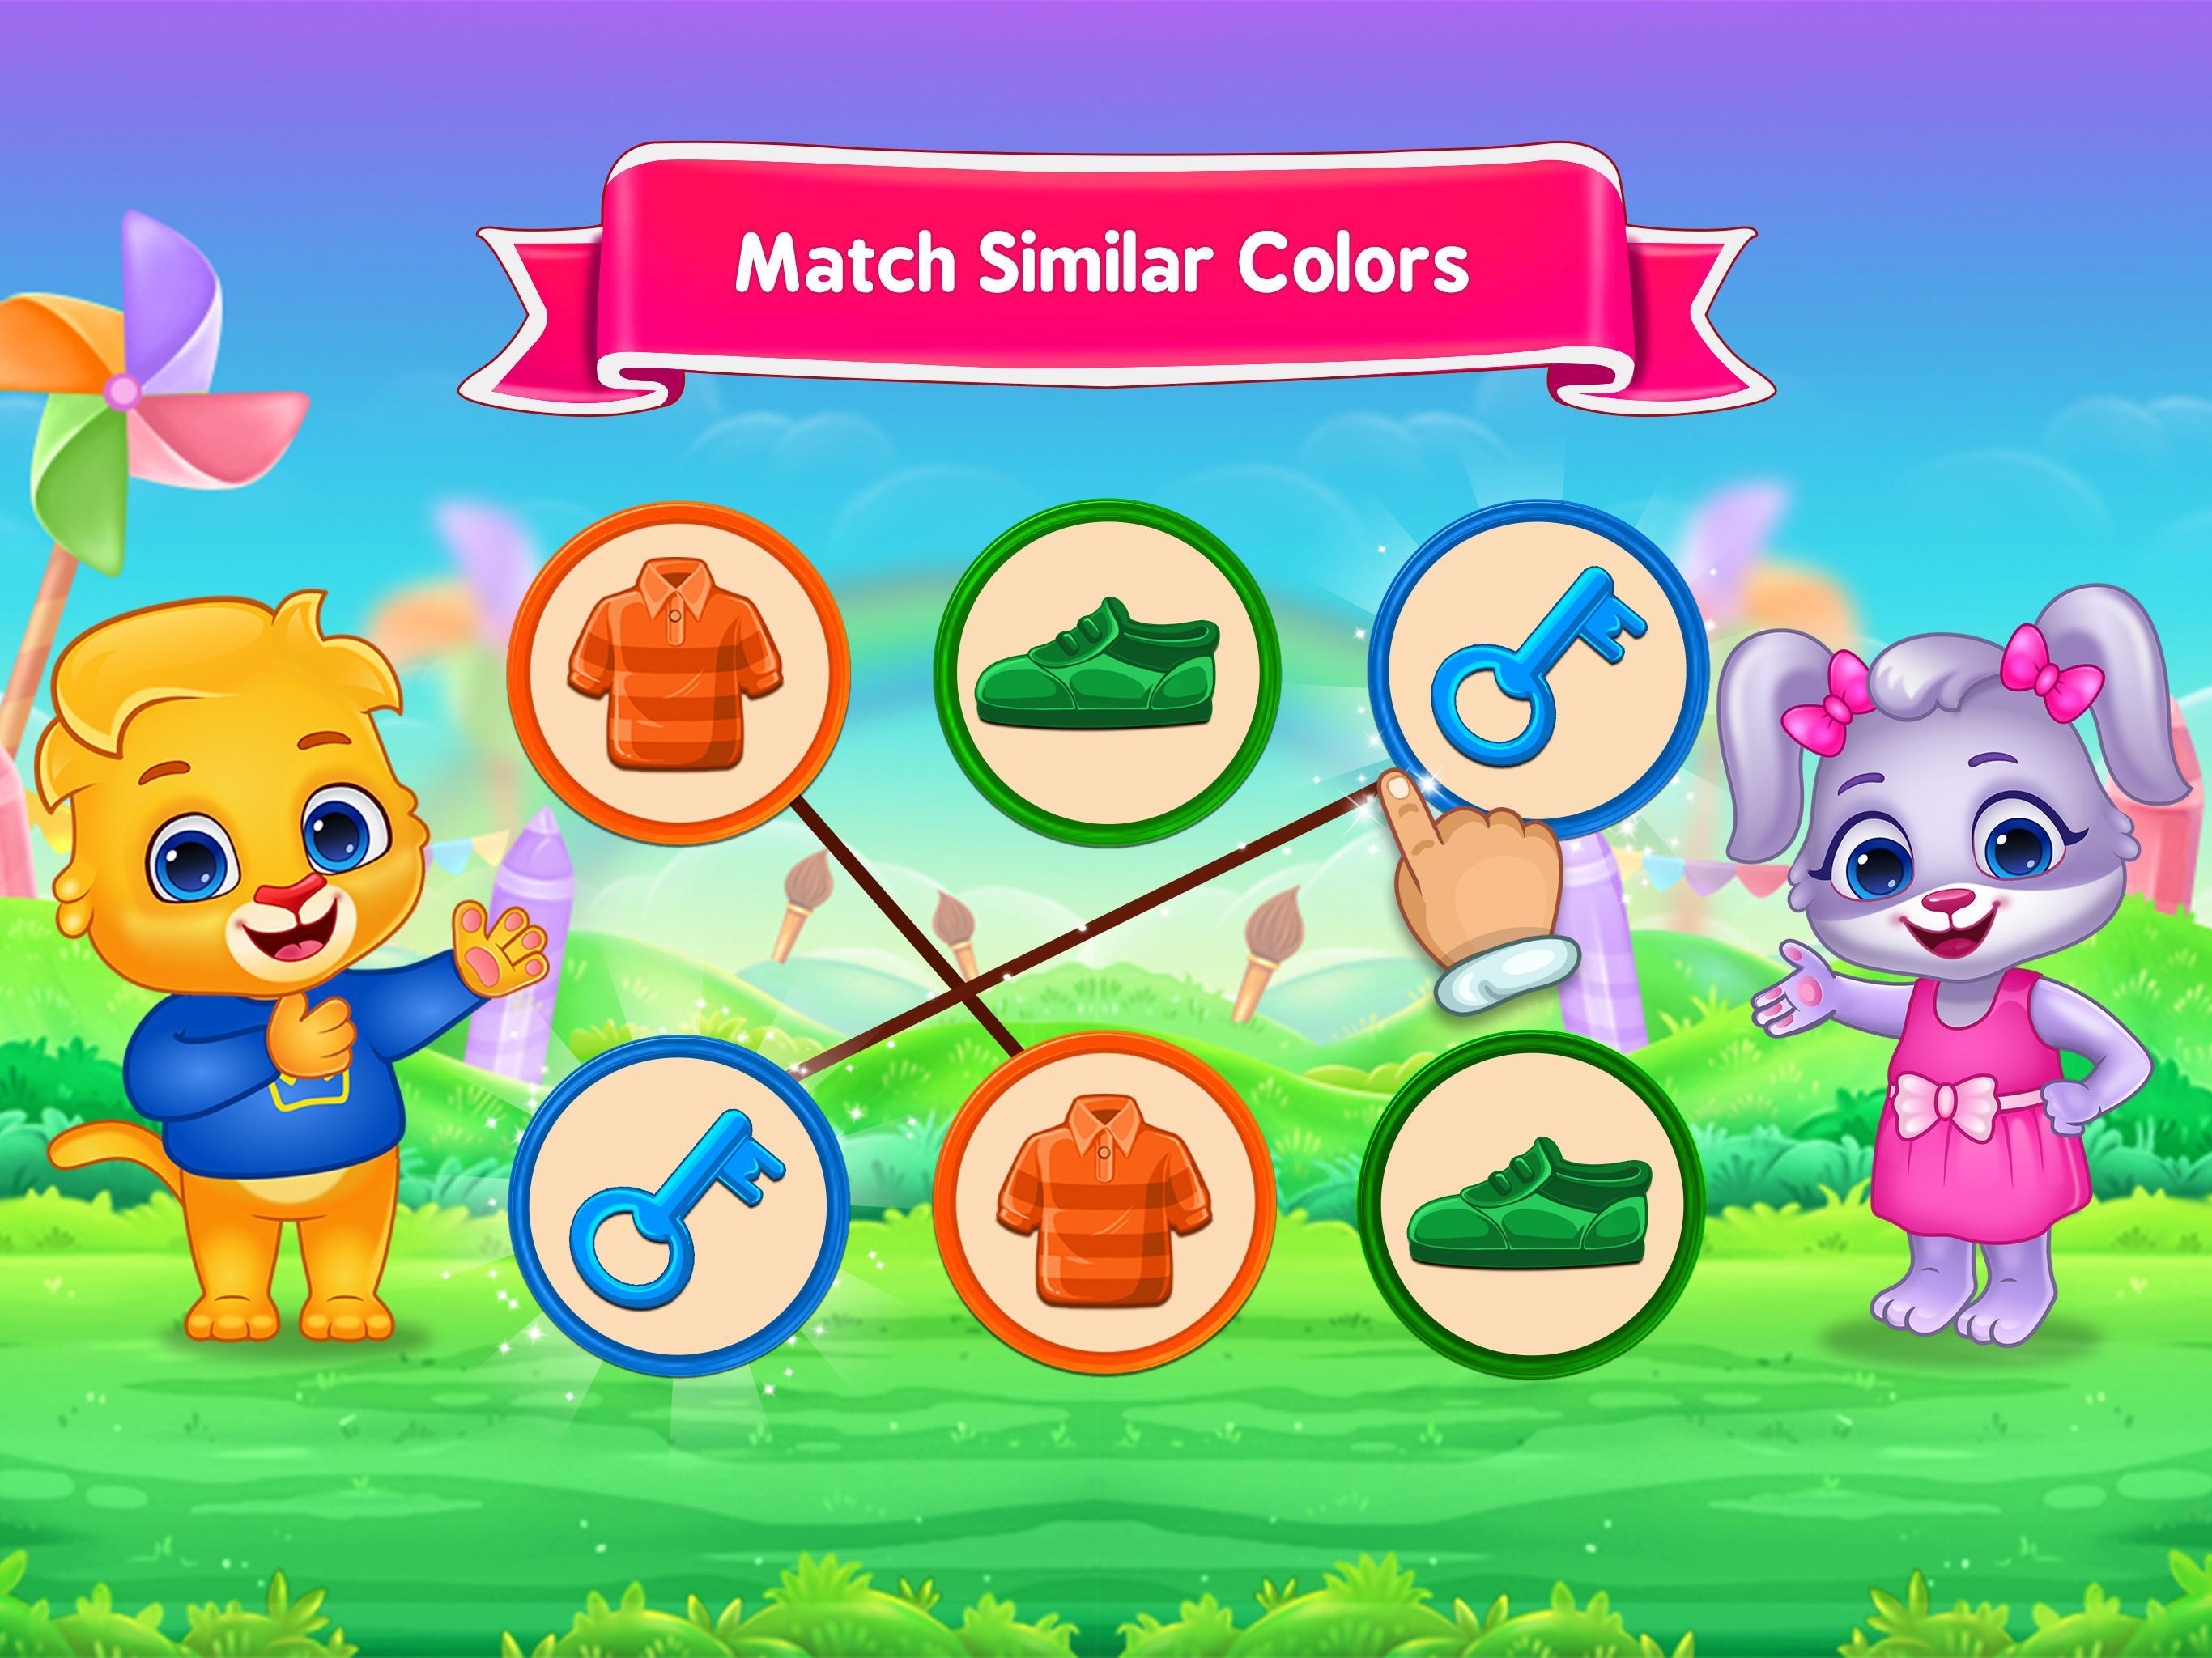 Colors & Shapes - Kids Learn Color and Shape 1.2.5 Screenshot 13